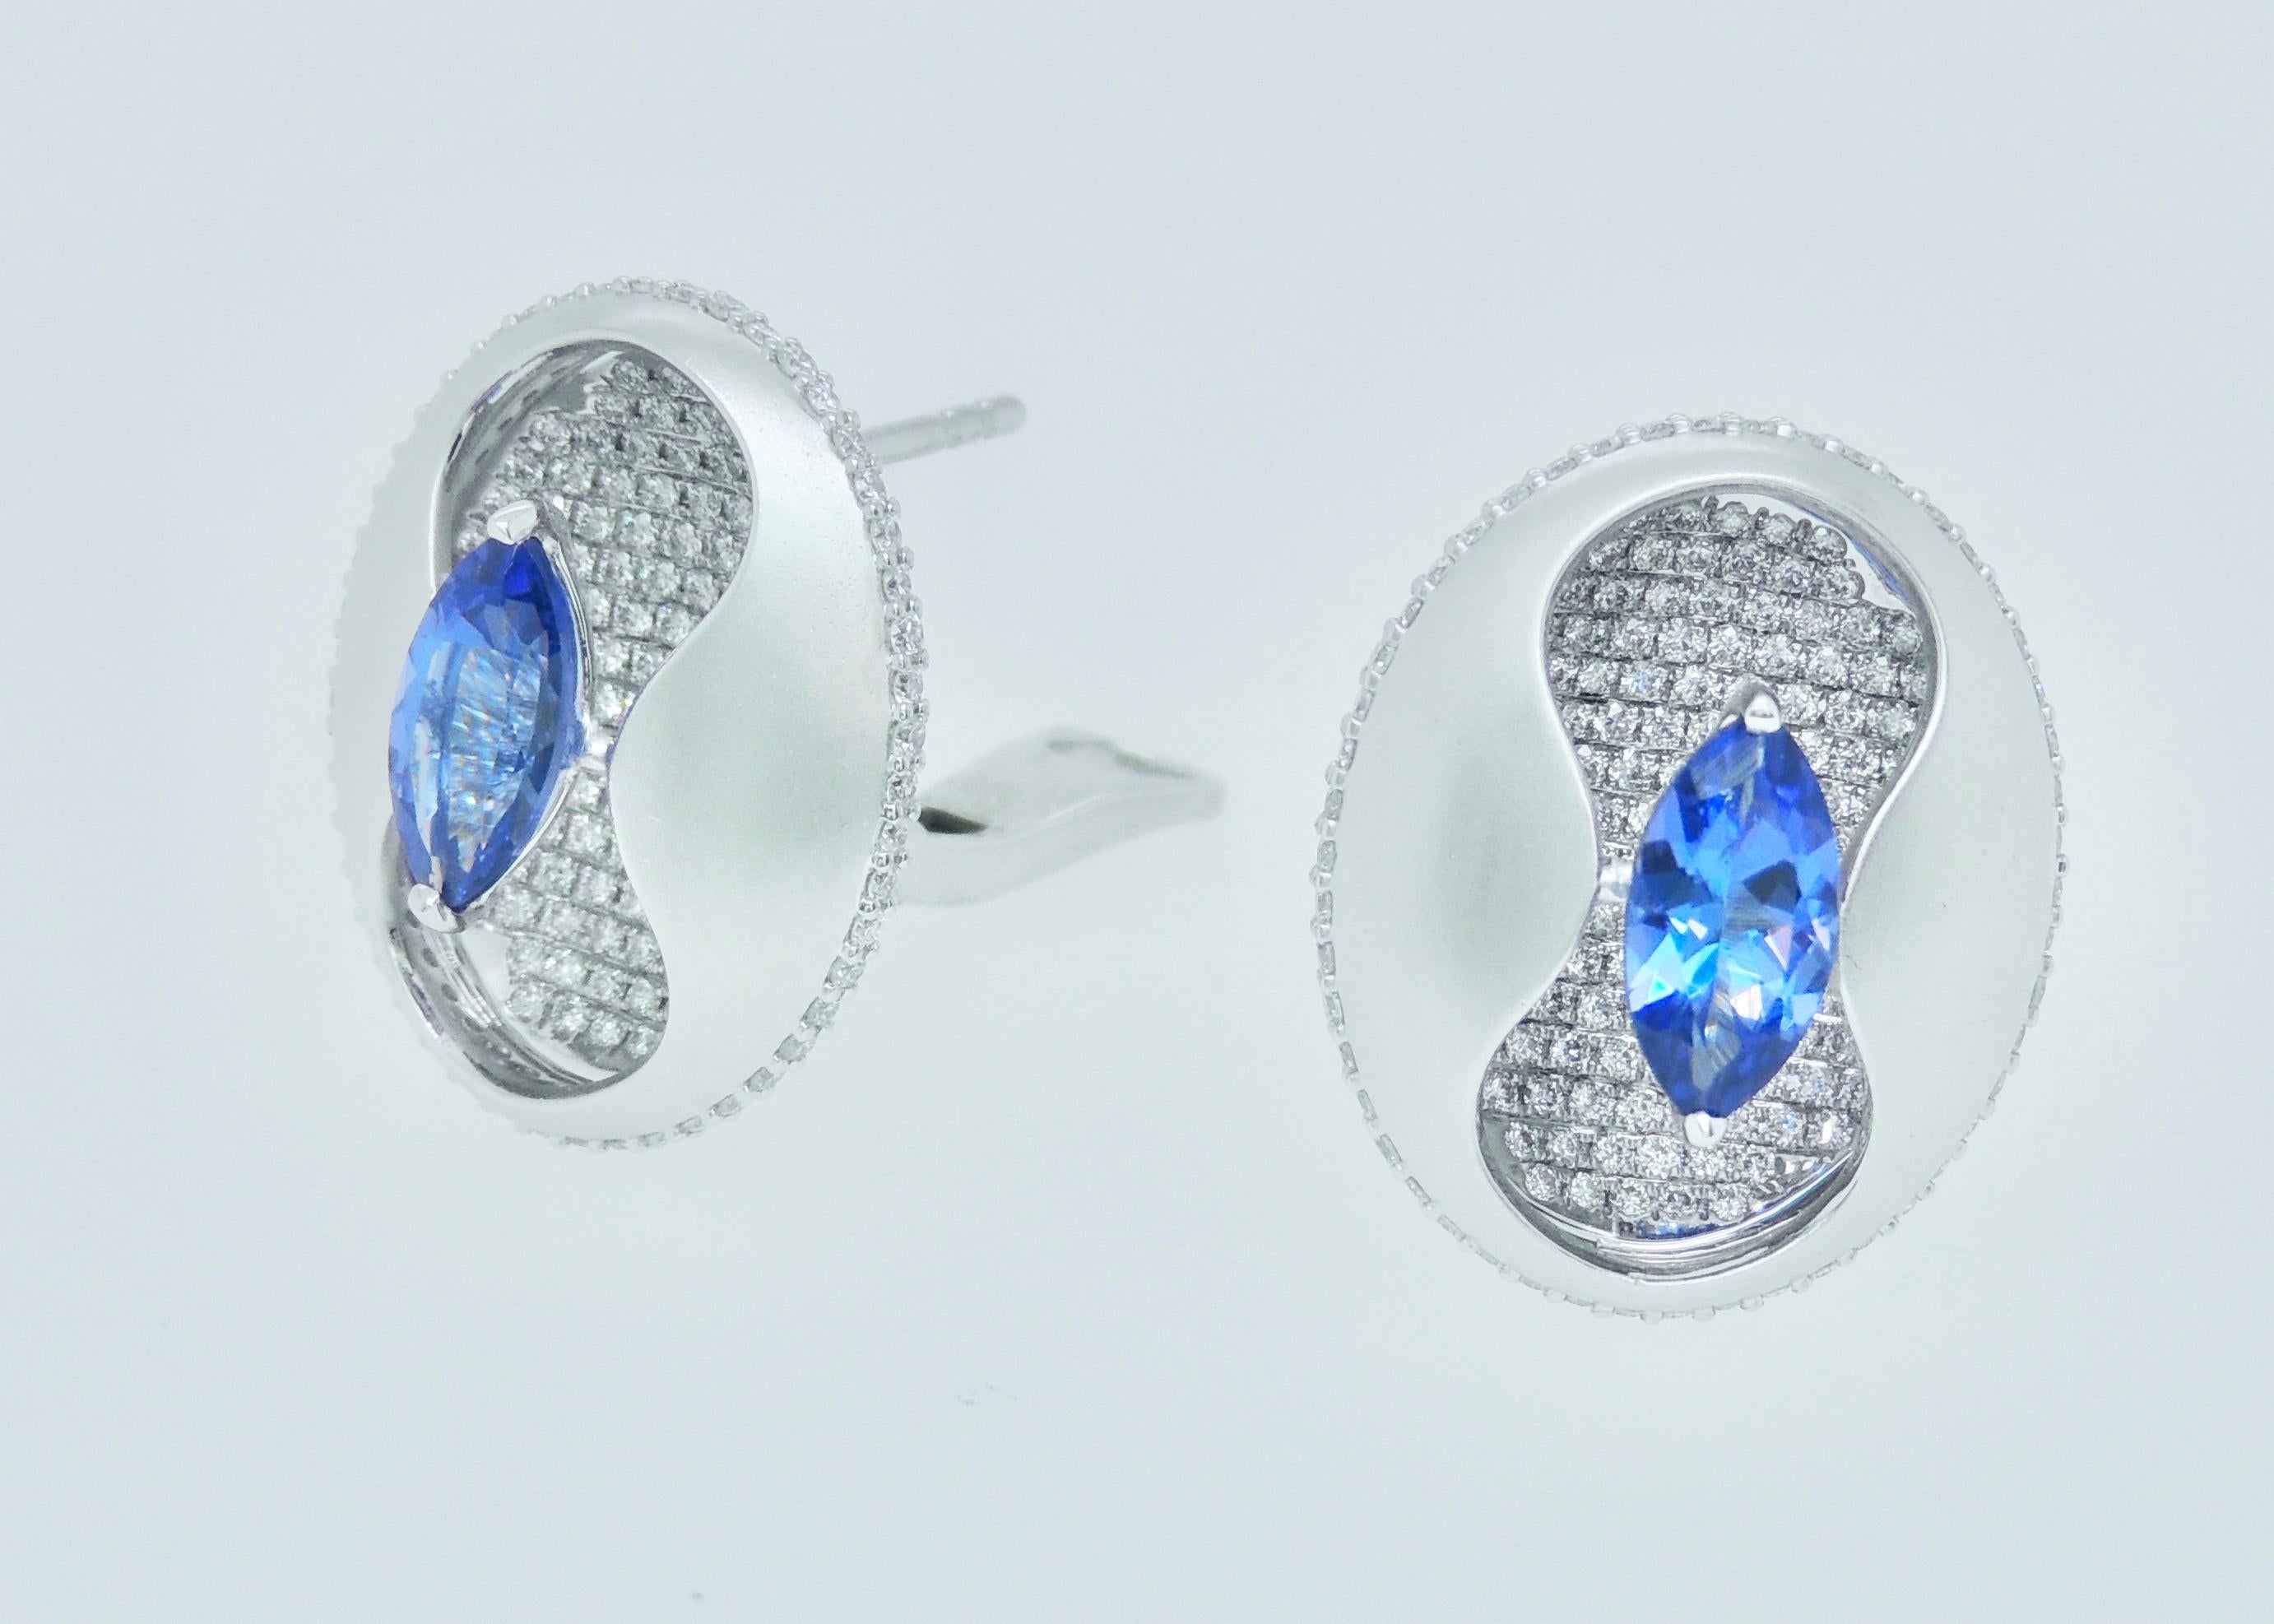 Exquisite pear-shaped tanzanites appear to float above a carpet of micropavé diamonds in these stunning earrings made with textured gold. 

The matte finish of the gold contrasts beautifully with sparkling, white diamonds and royal blue of the